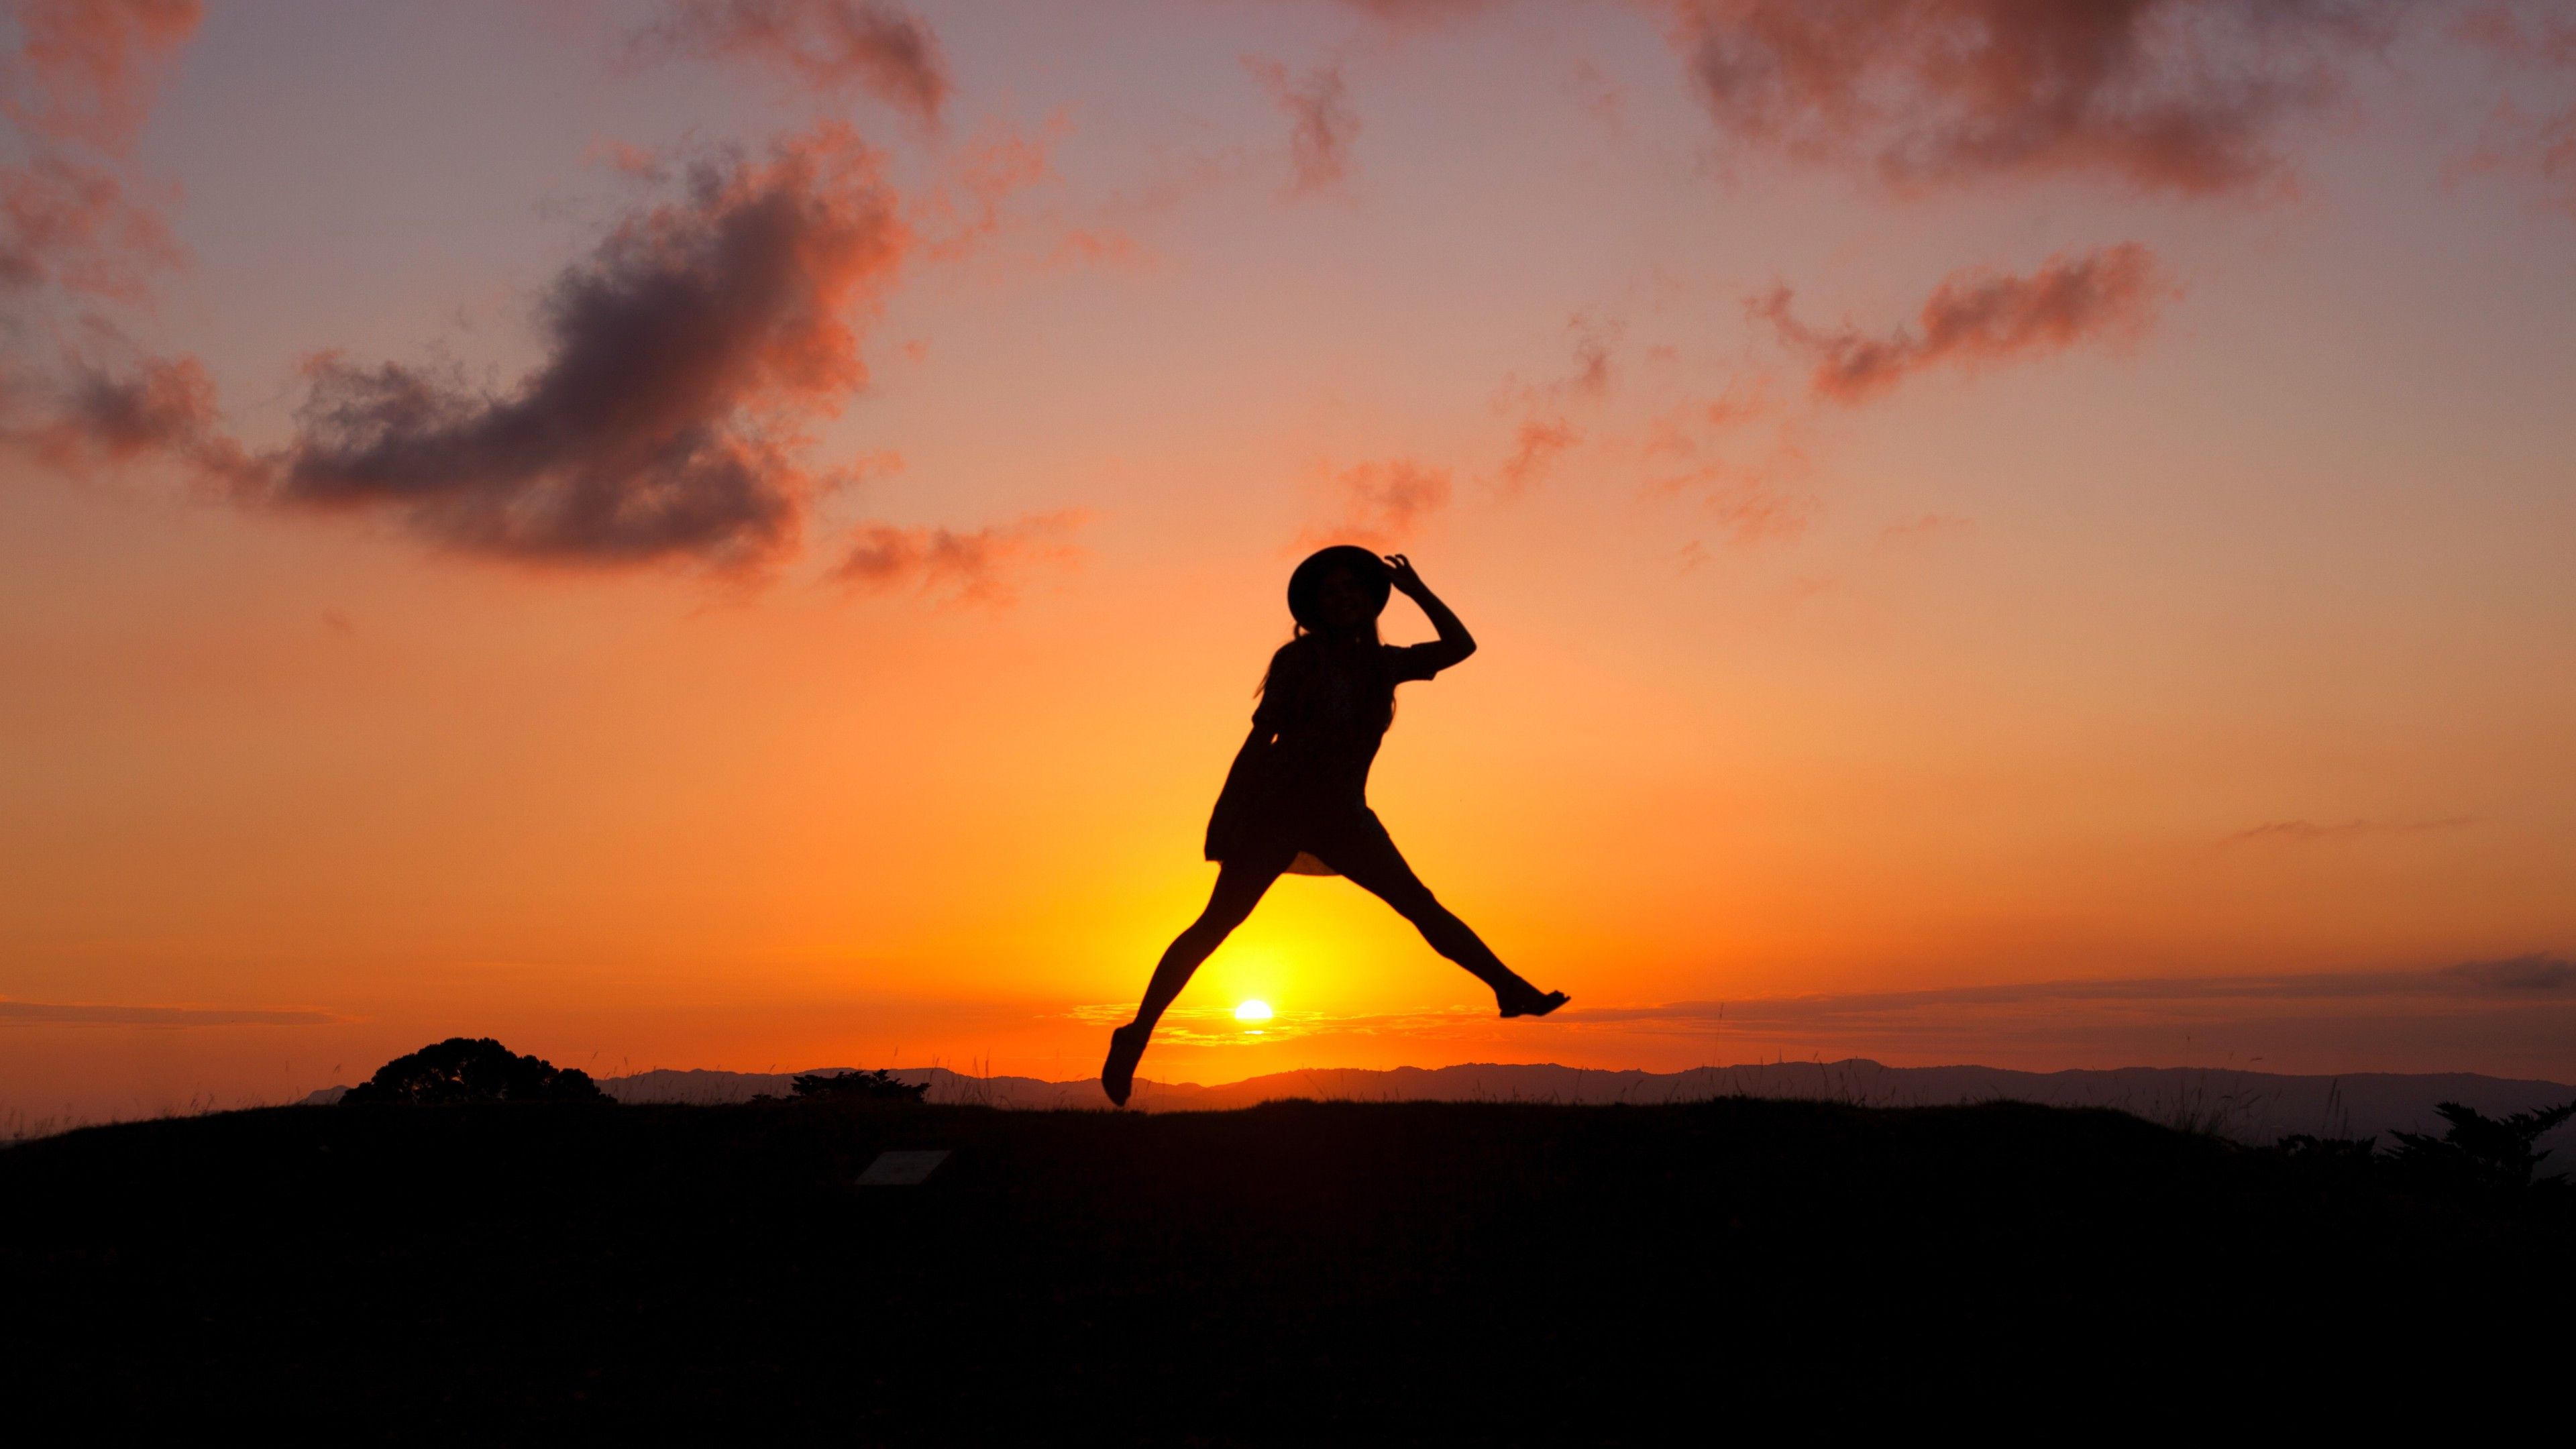 Sunrise 4K Wallpaper, Silhouette, Woman, Jumping, Girl, Clouds, Happy Mood, 5K, Photography